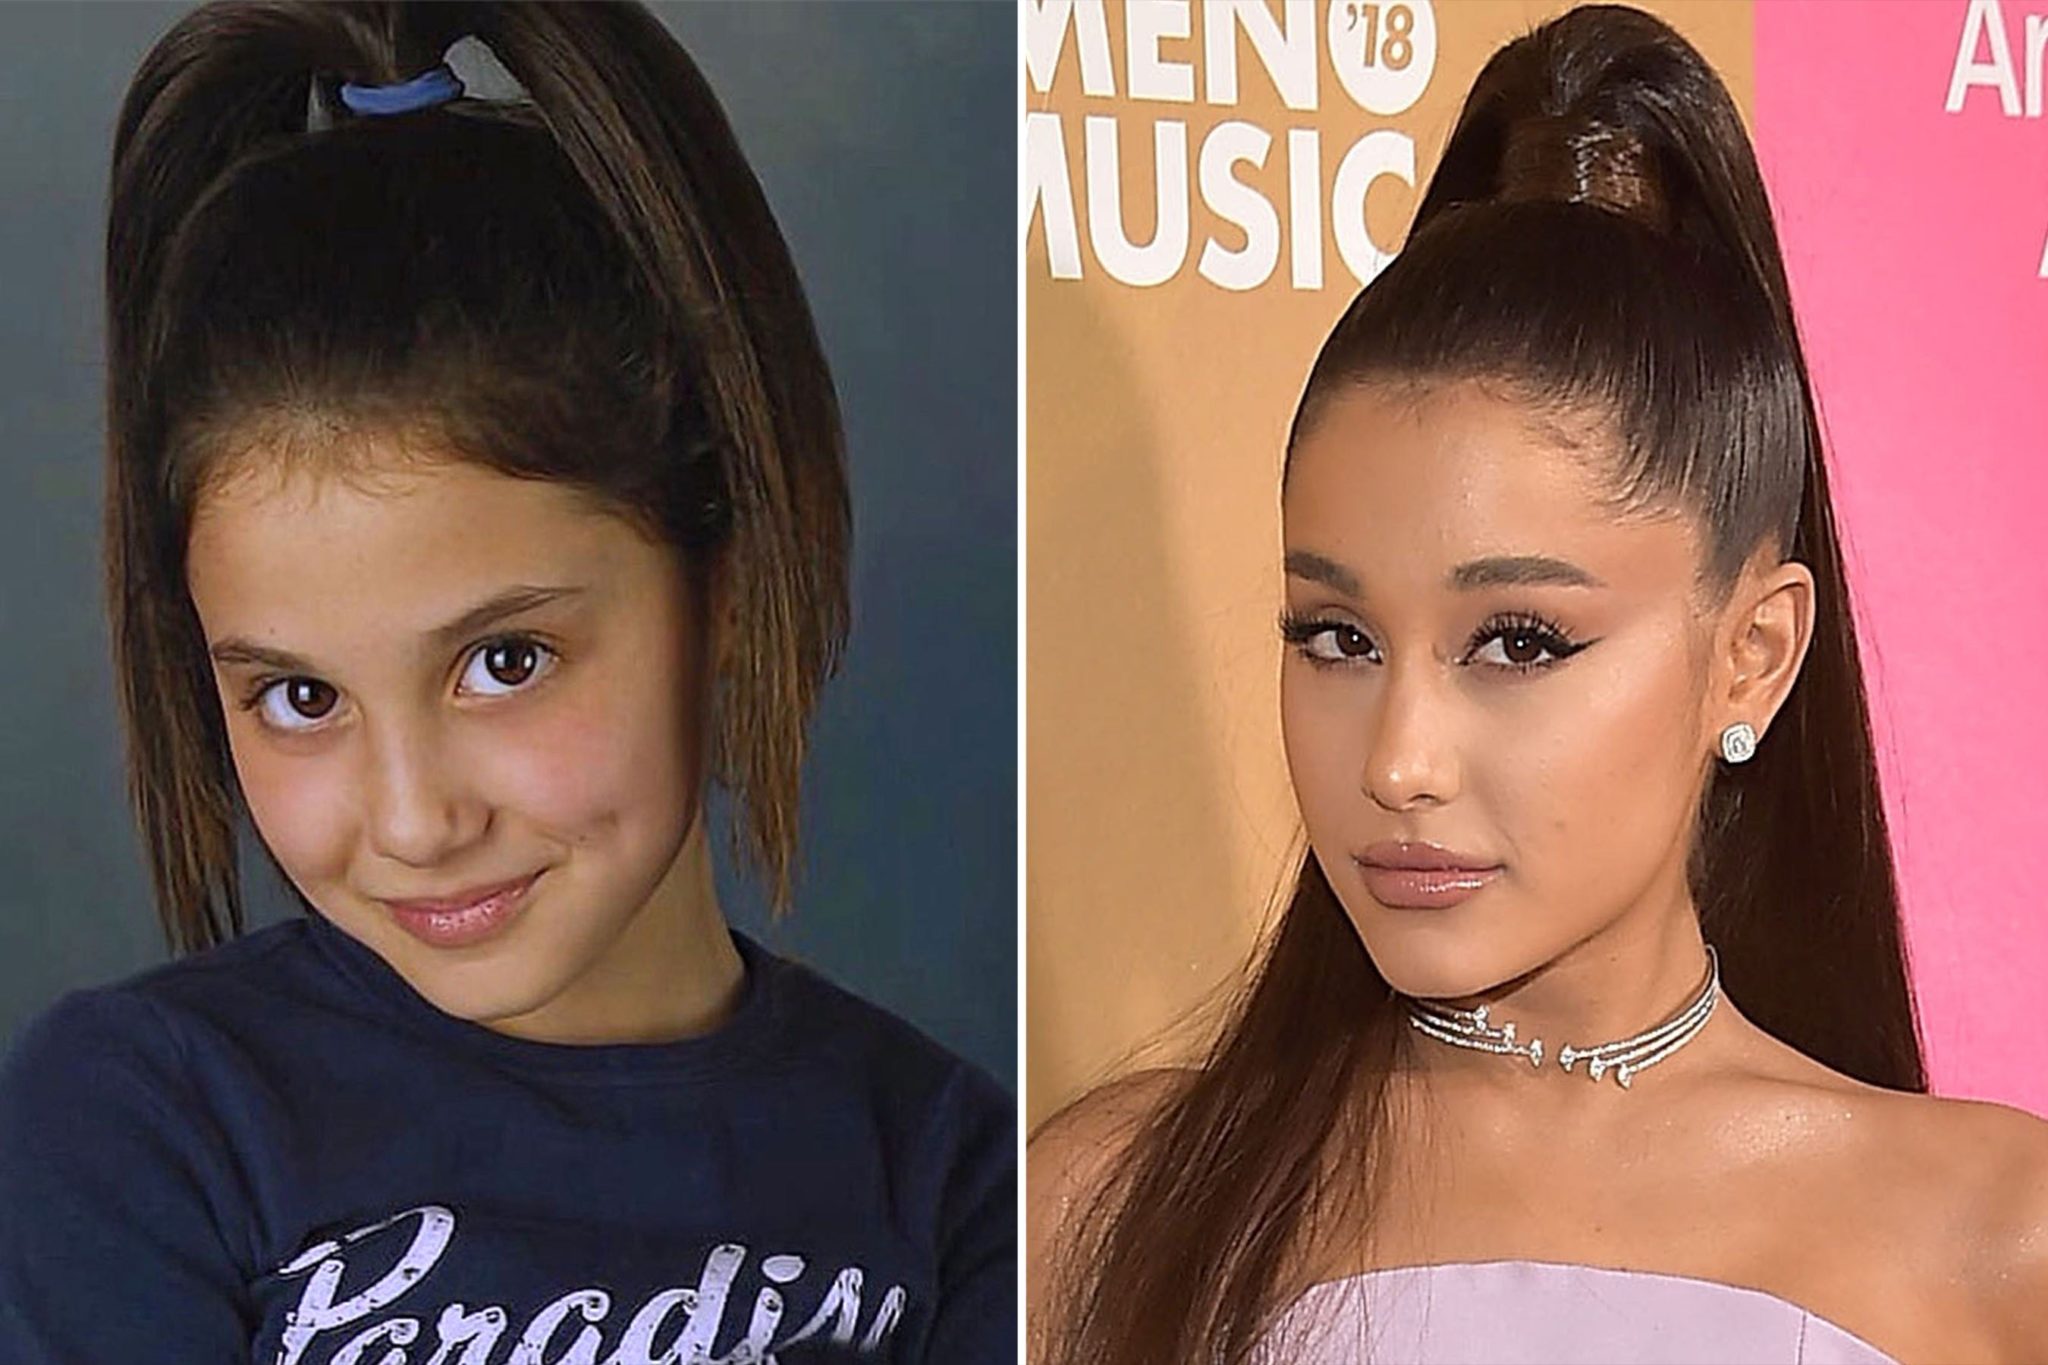 Ariana Grande Before & After The Power of Plastic Surgery! DemotiX